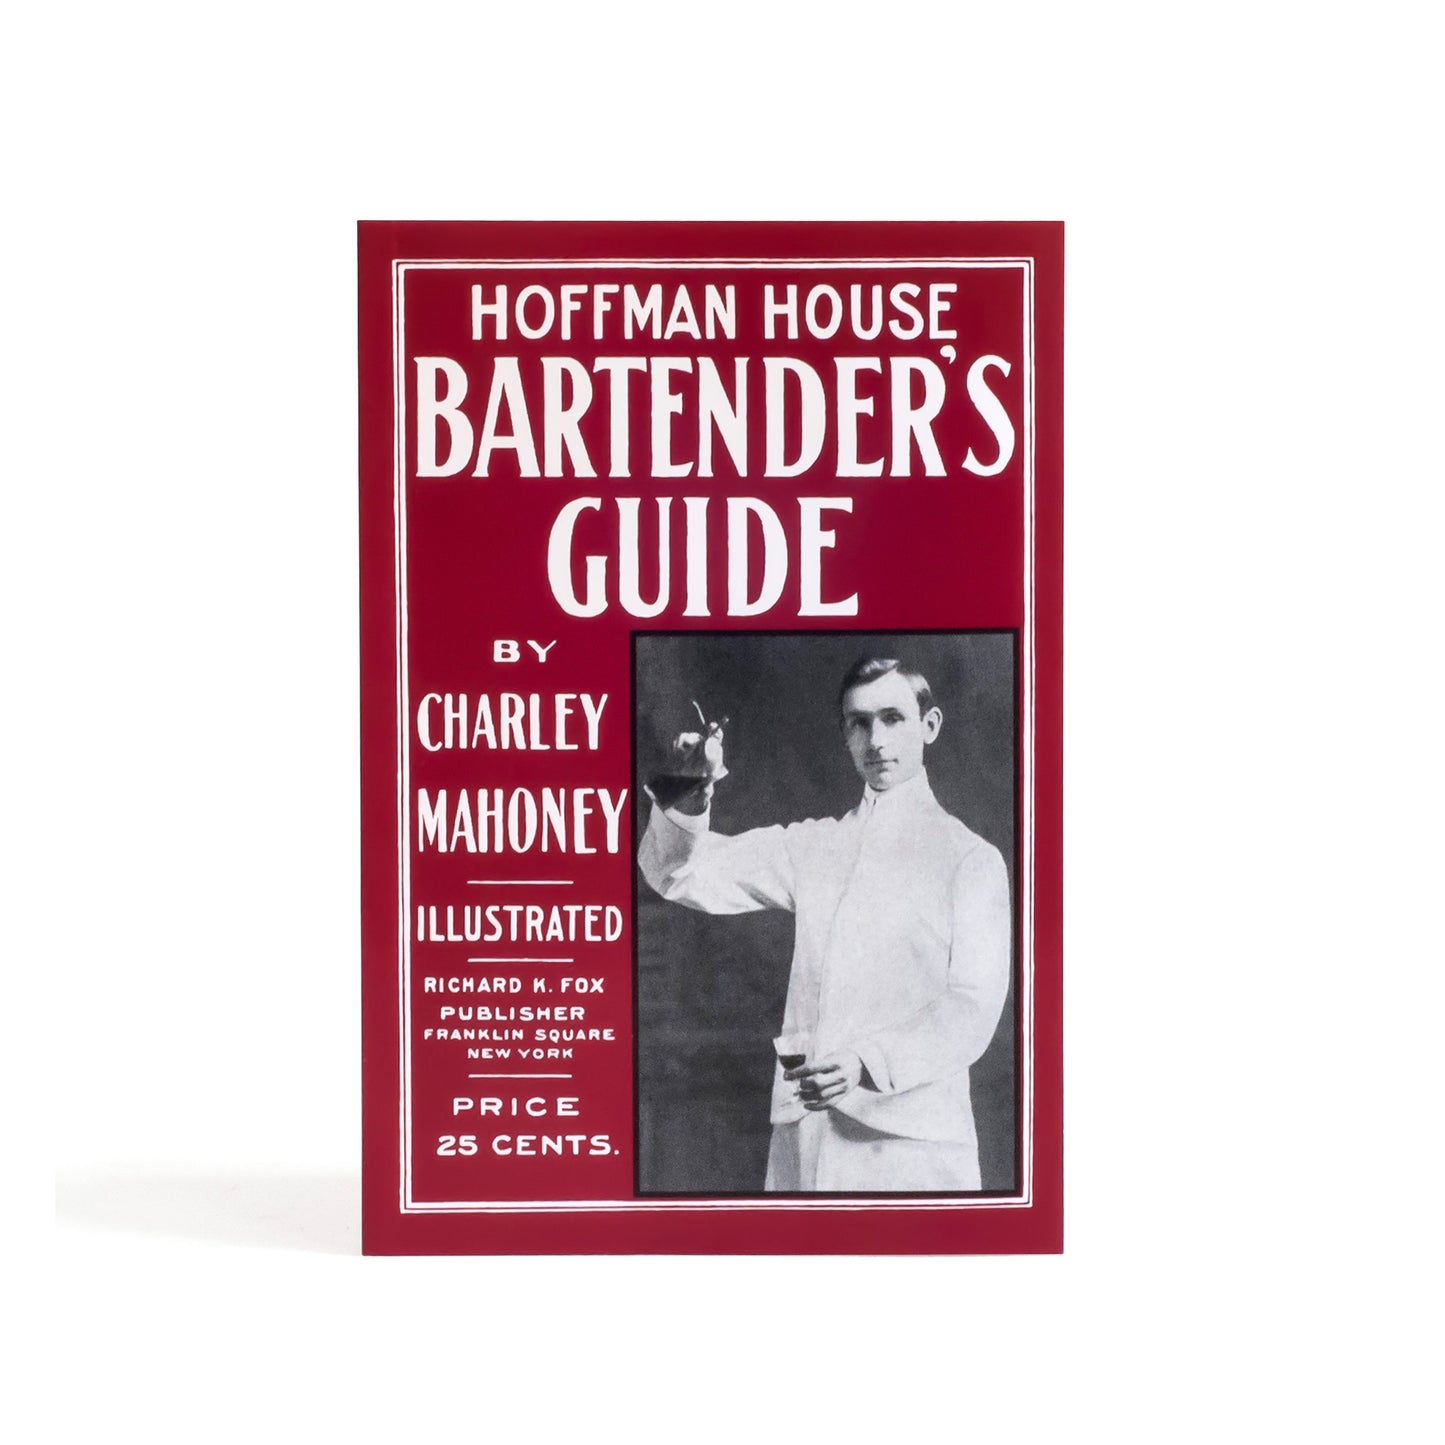 HOFFMAN HOUSE BARTENDER'S GUIDE BY CHARLEY MAHONEY